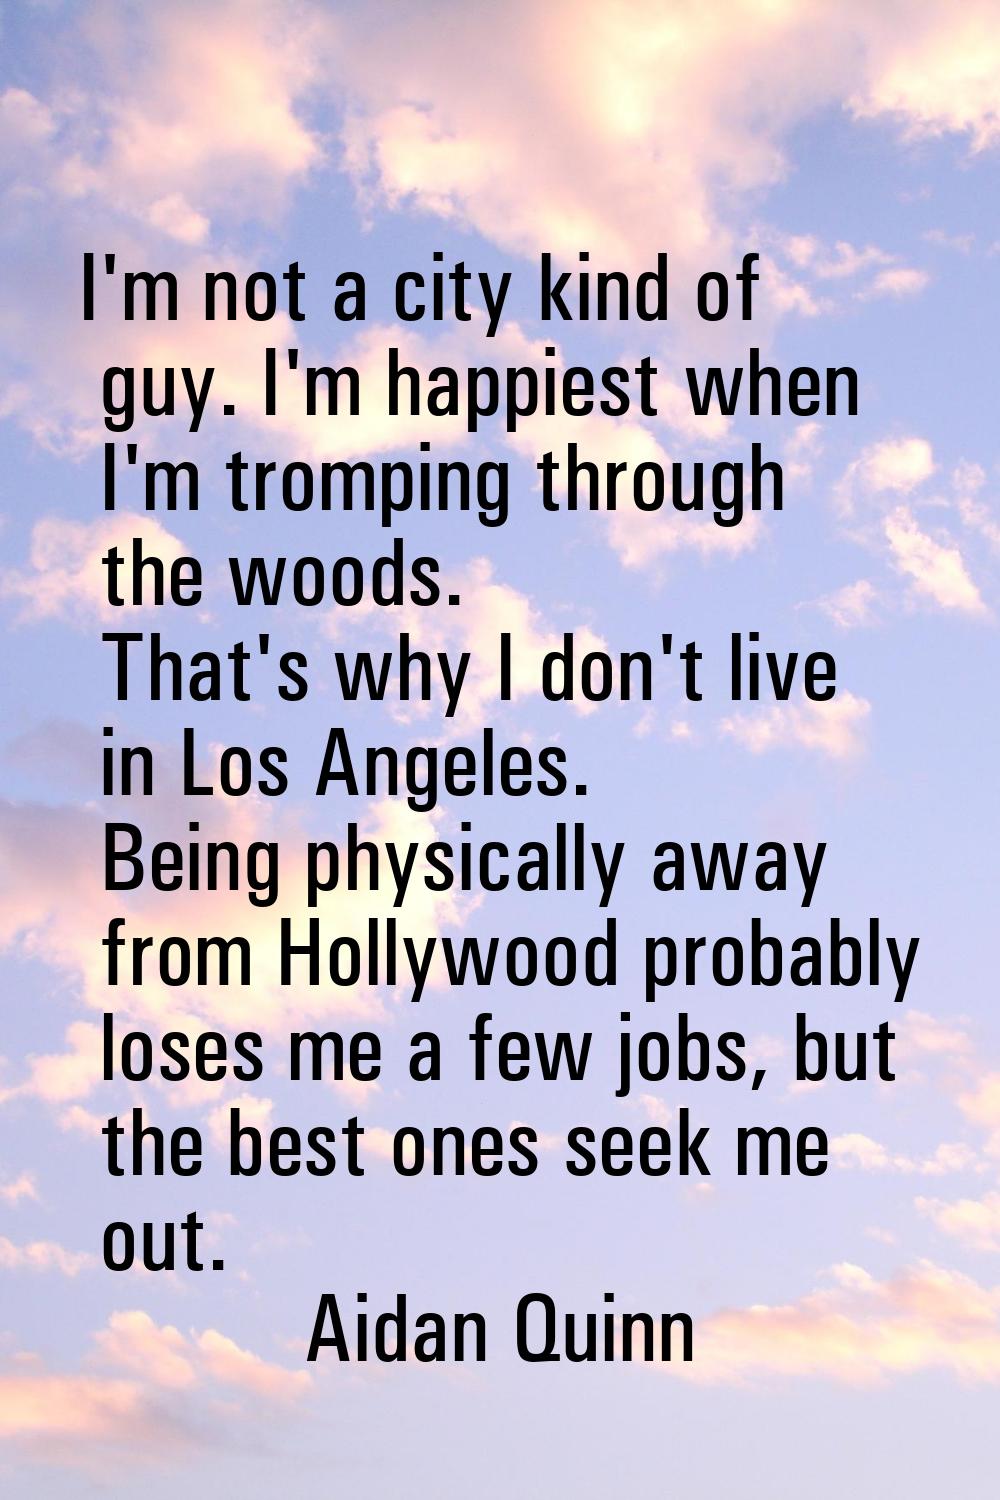 I'm not a city kind of guy. I'm happiest when I'm tromping through the woods. That's why I don't li